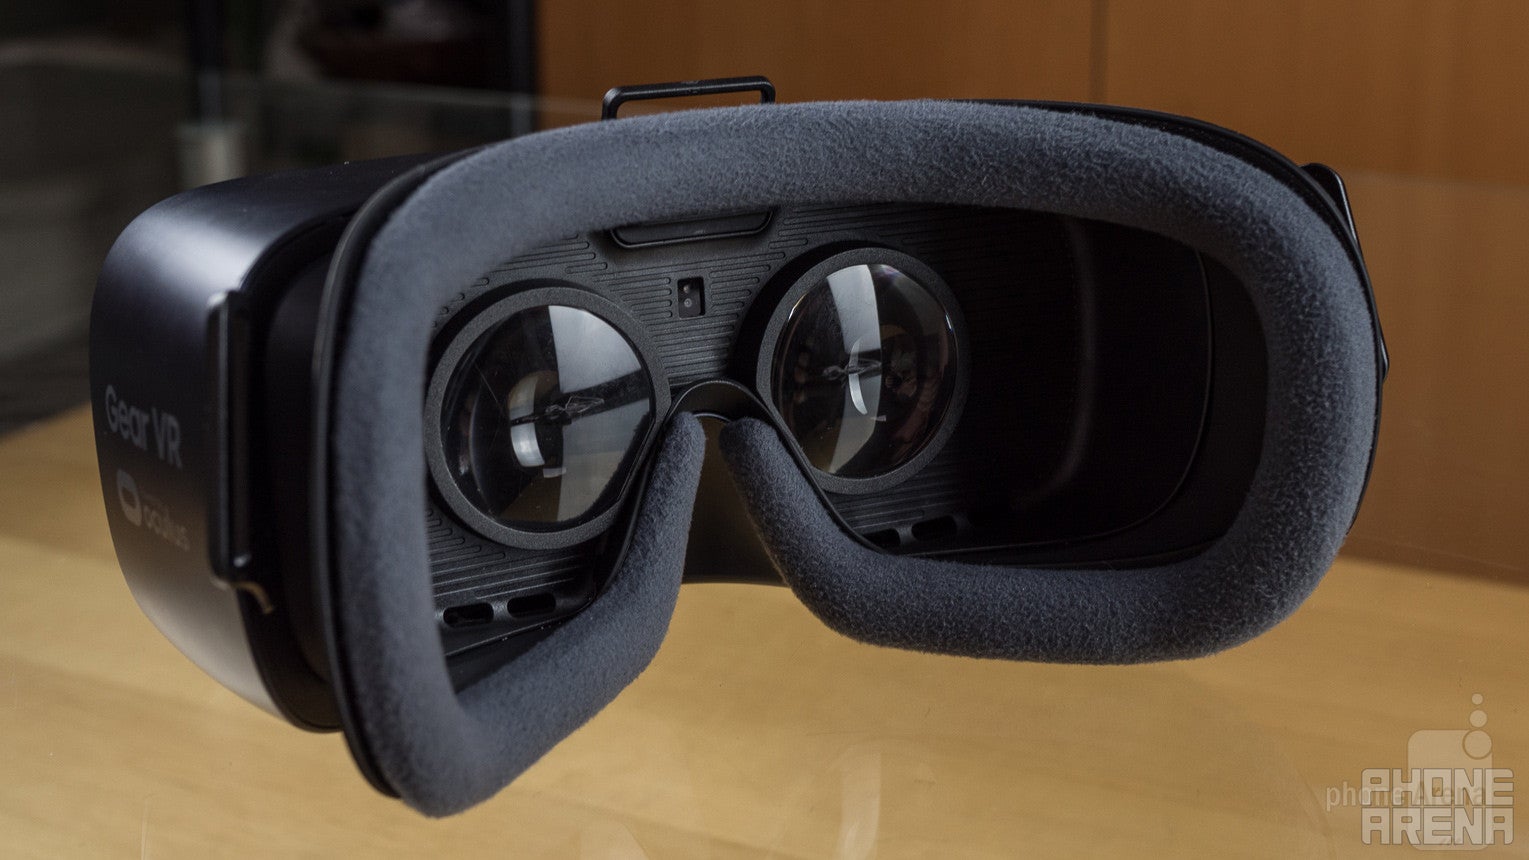 Samsung Gear VR 2016 Review